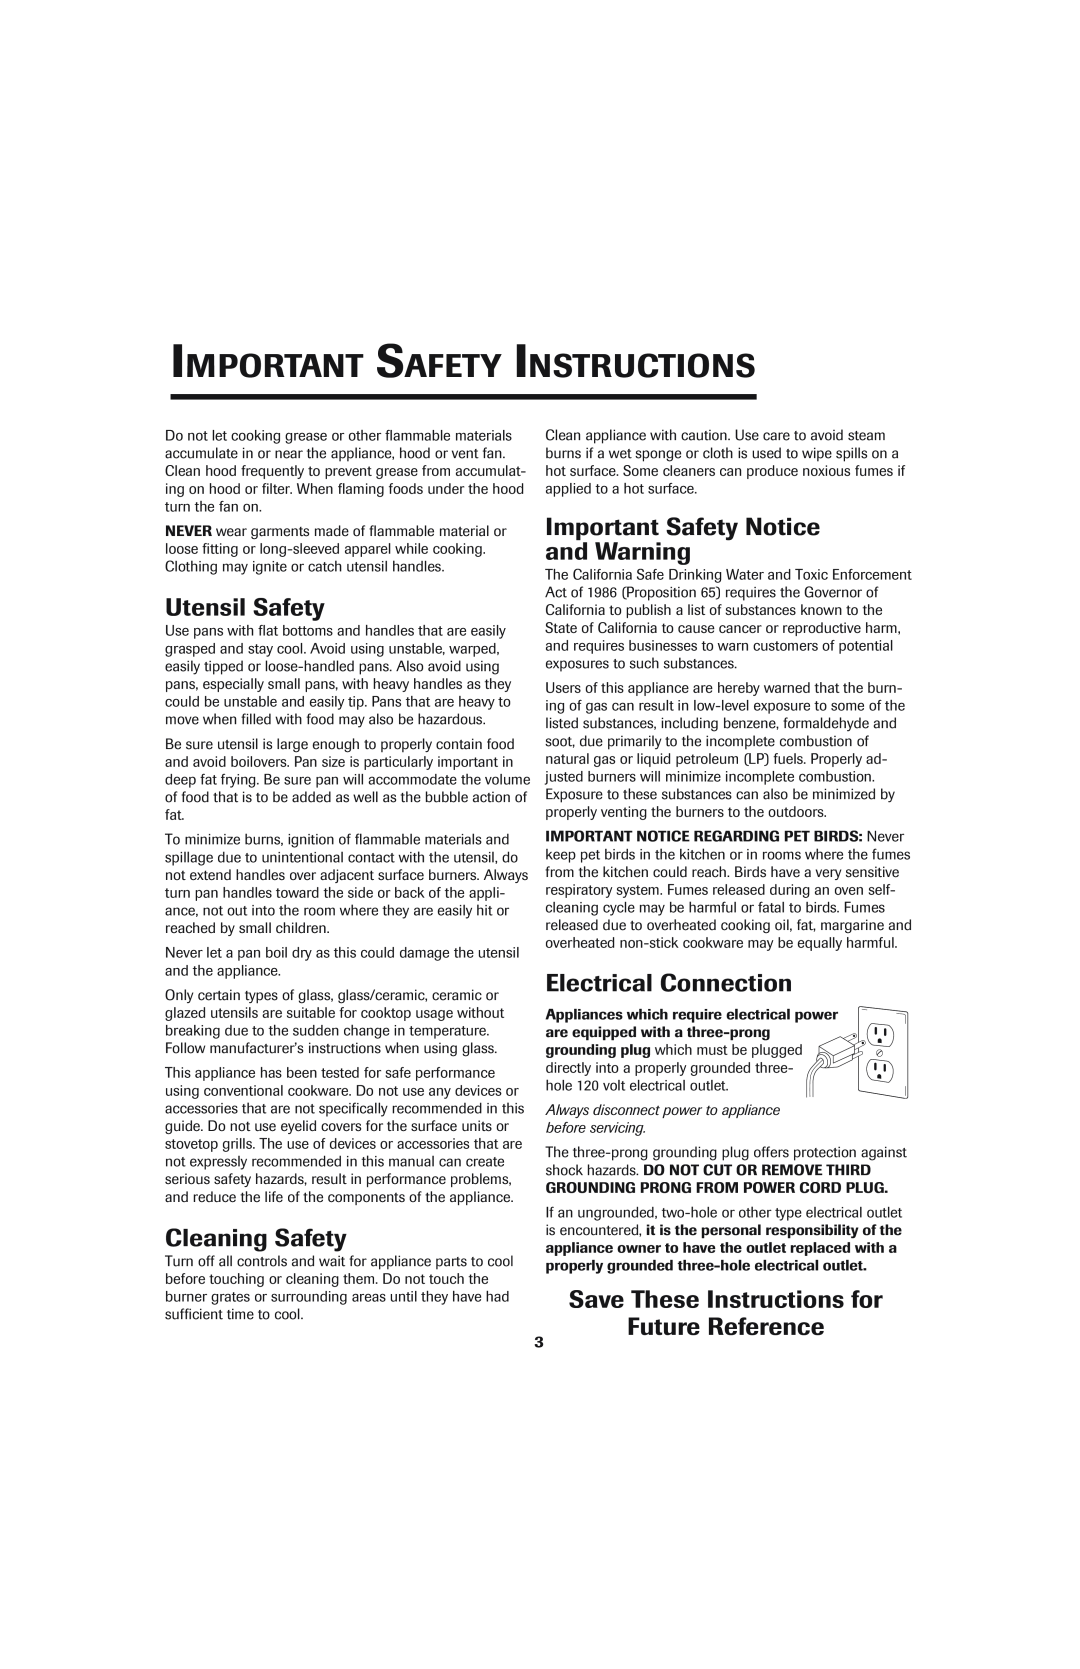 Jenn-Air 8112P342-60 Utensil Safety, Cleaning Safety, Important Safety Notice and Warning, Electrical Connection 